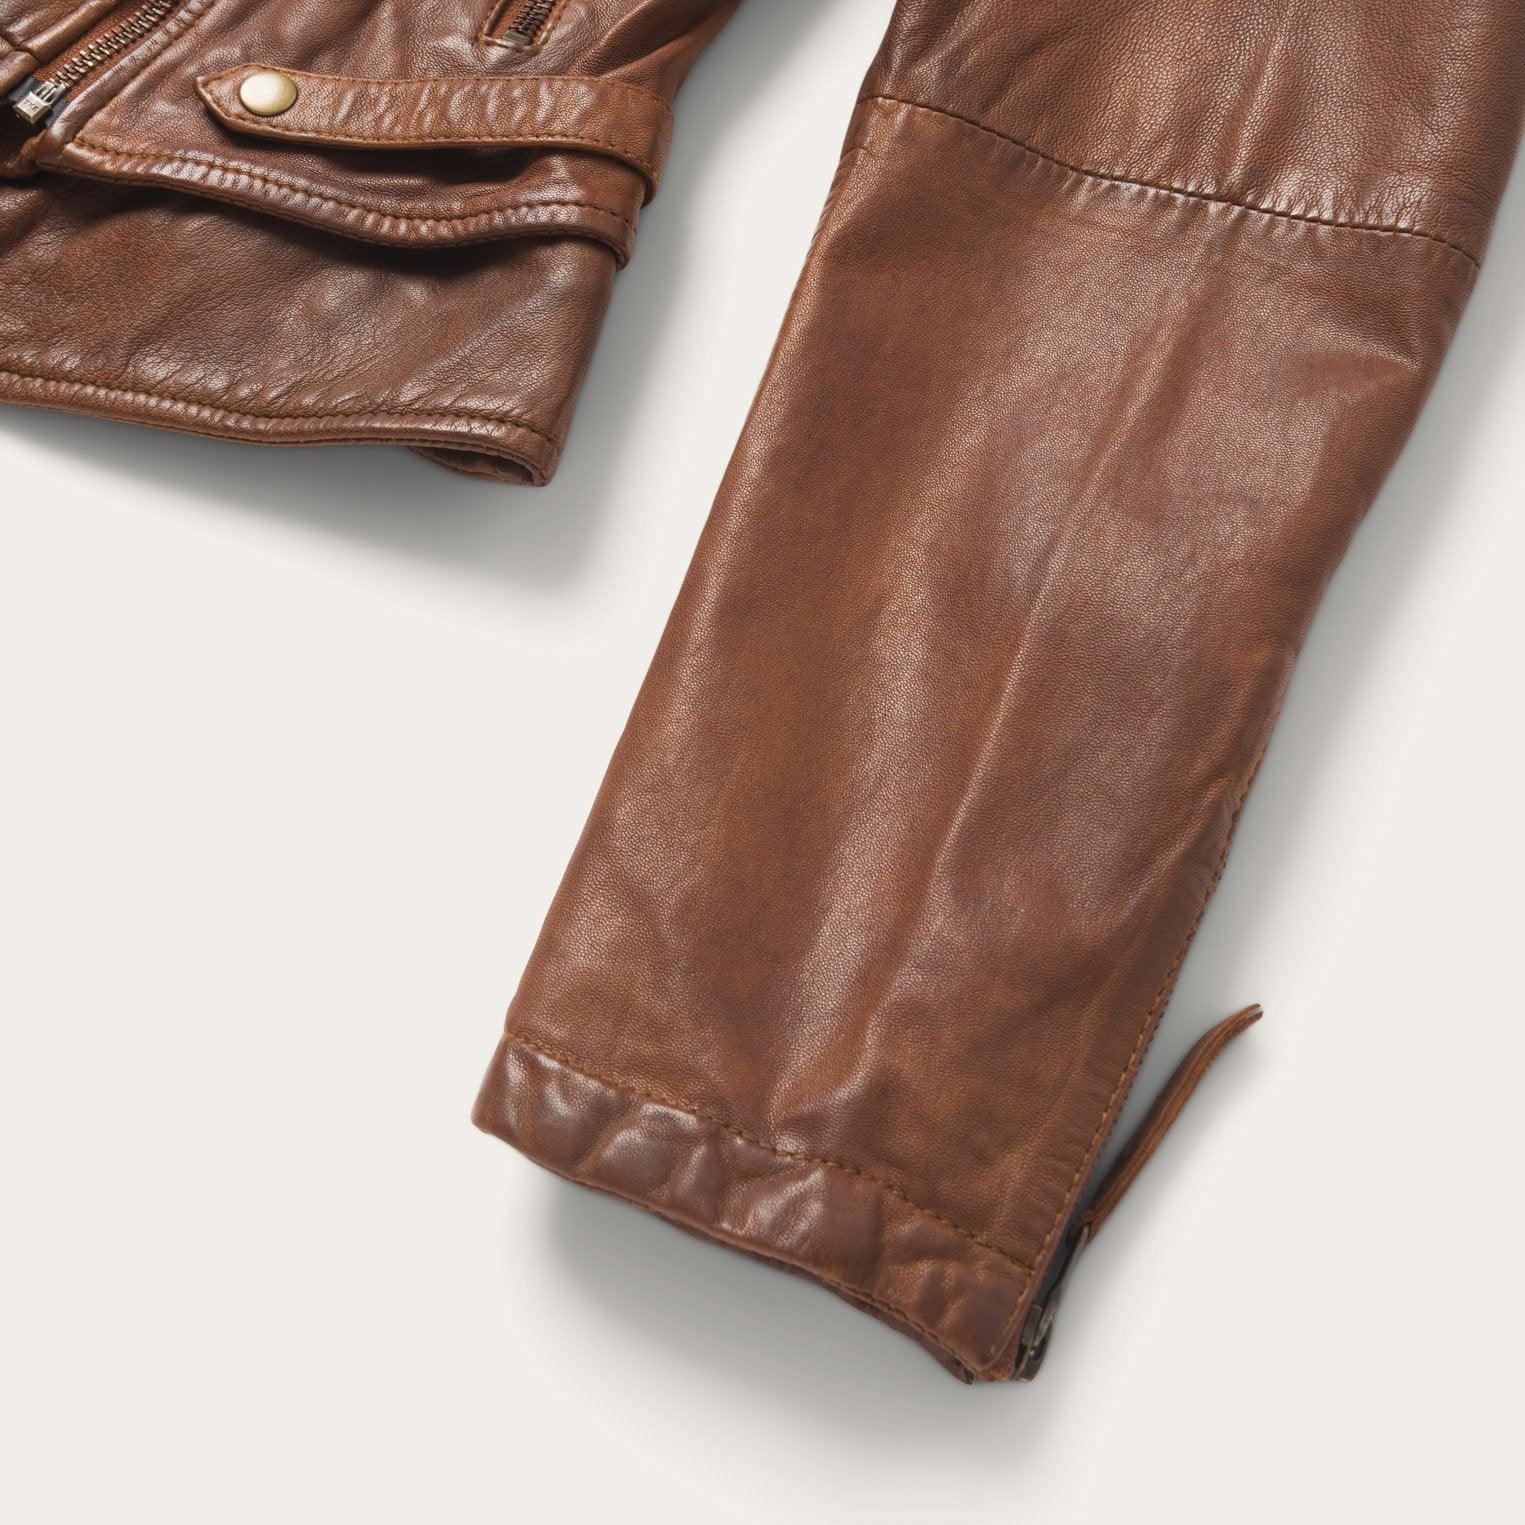 Stetson Brown Leather Moto Jacket - Flyclothing LLC